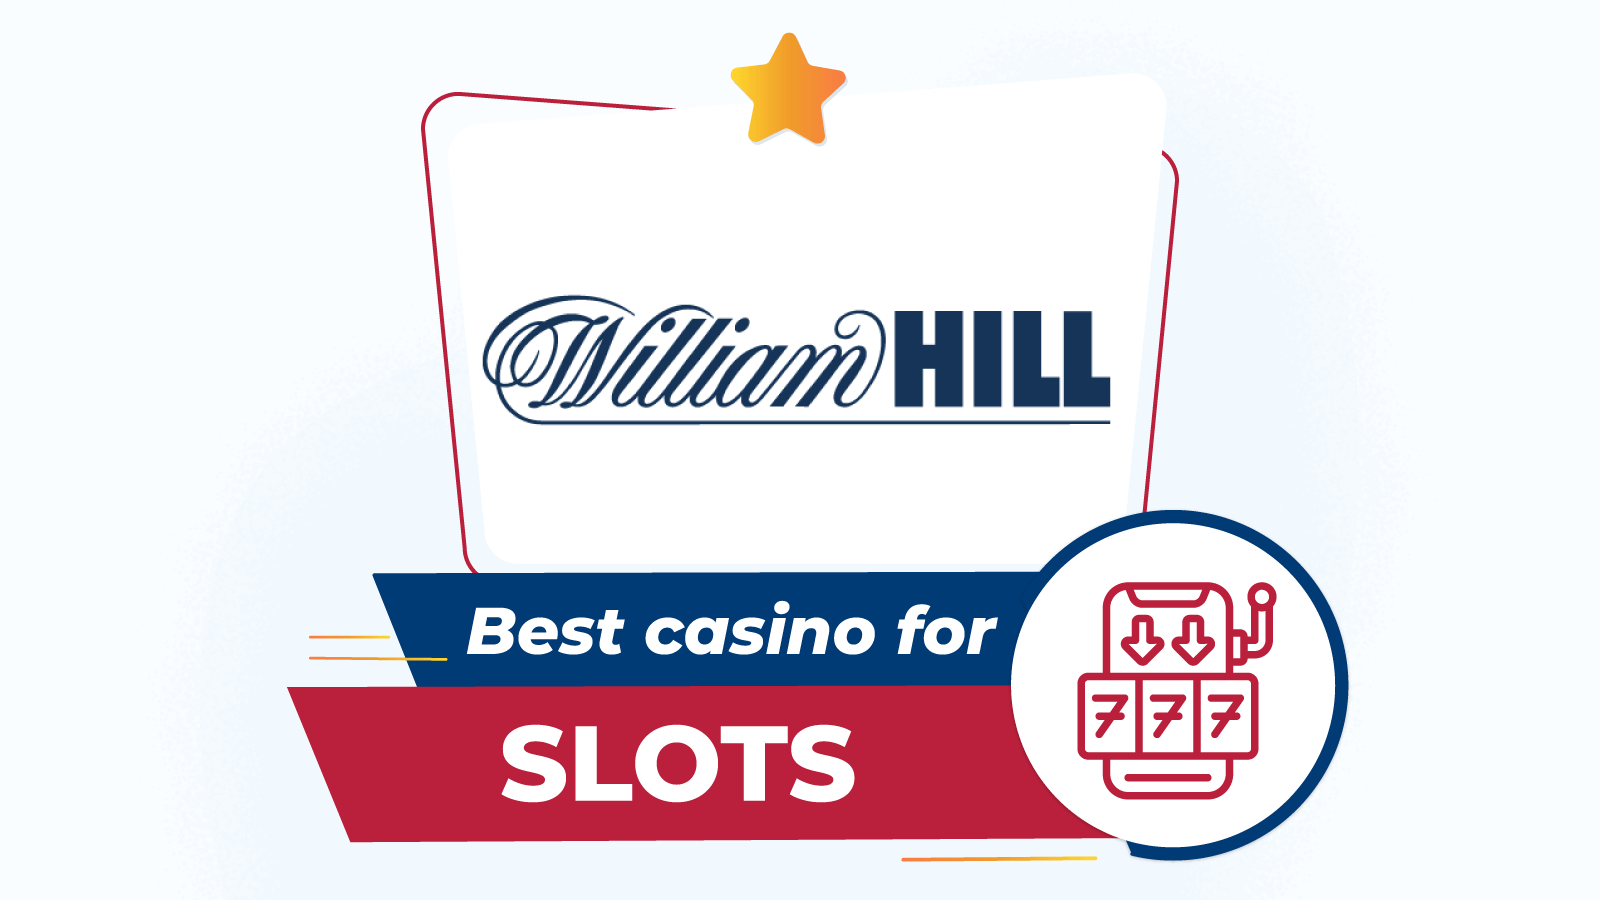 #4. William Hill – Best Casino for Microgaming Slotst